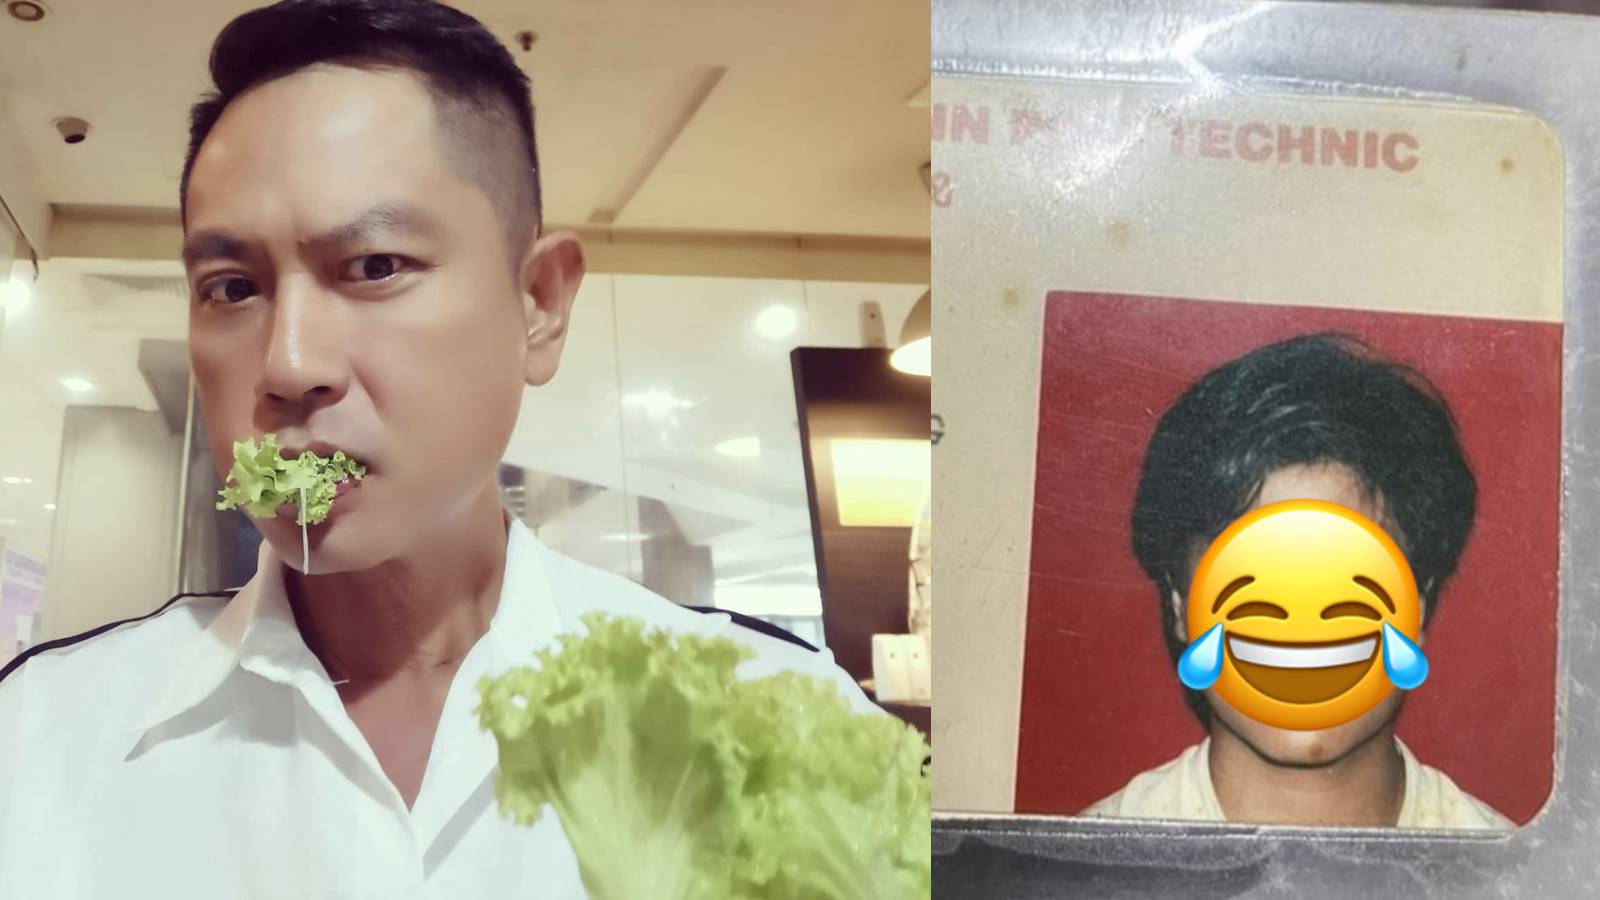 Chew Chor Meng’s Ngee Ann Poly Student Pass Pic Is Truly One-Of-A-Kind